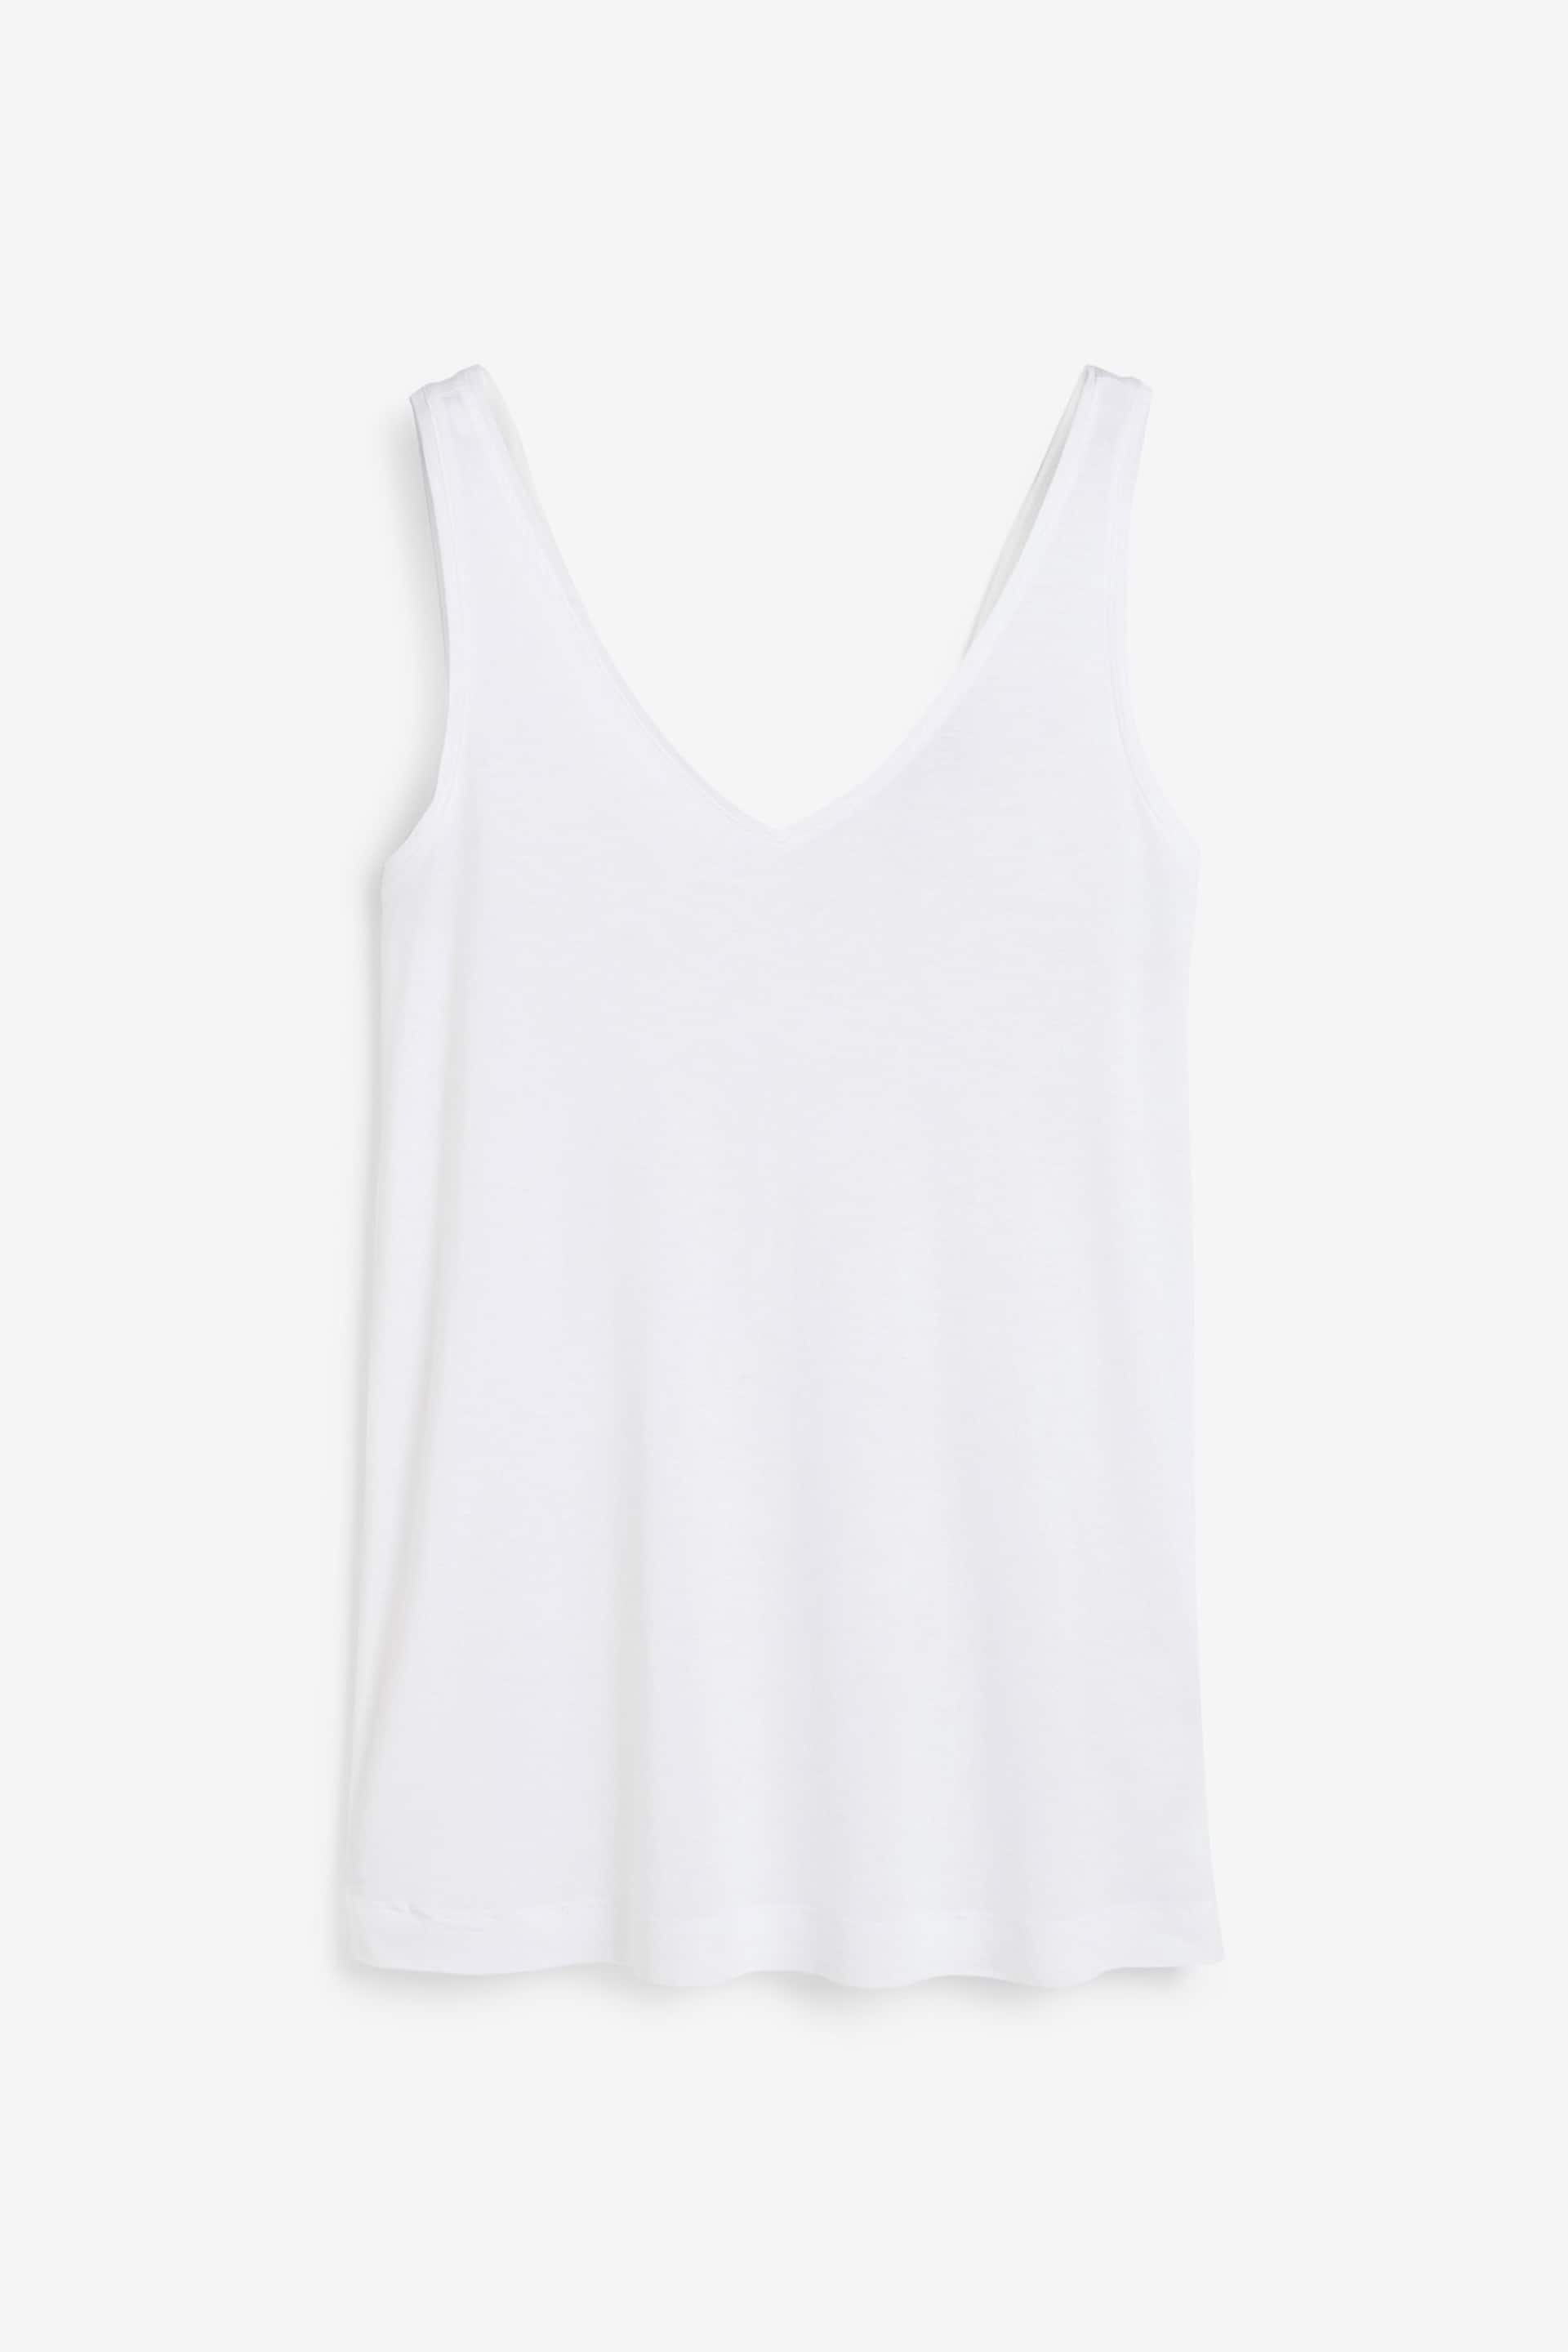 White Slouch Vest - Image 5 of 5